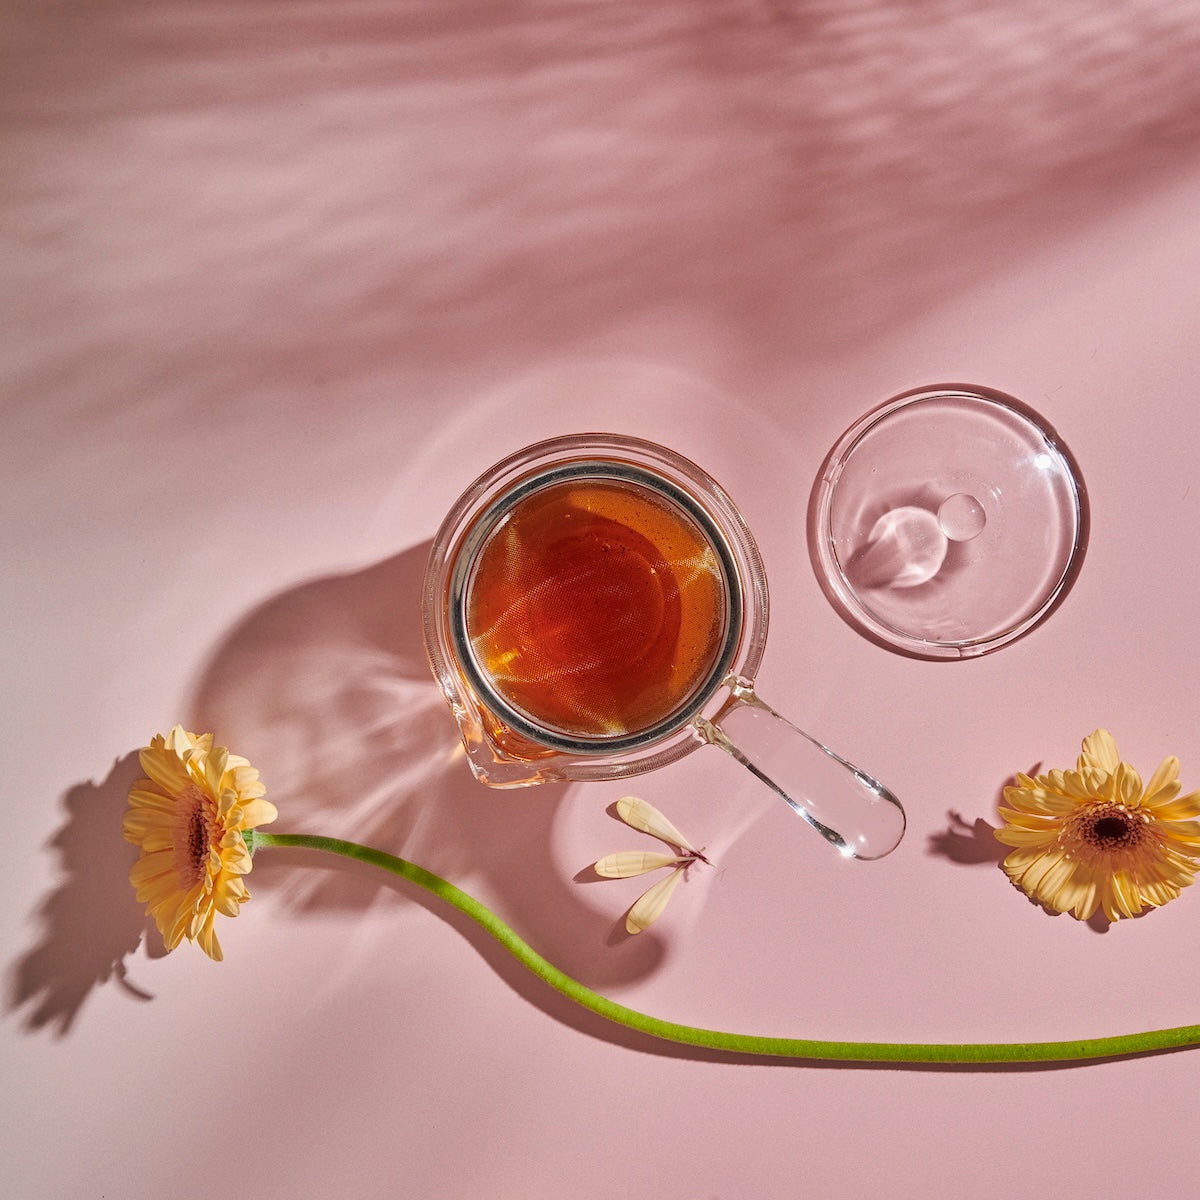 A glass cup filled with loose leaf tea sits on a light pink surface next to a Tea-in-Hand: The Perfect Steep Side-pour Ceremonial Teapot made of borosilicate glass by Espresso Parts. Two yellow daisies and their shadows are visible, one lying horizontally across the table and the other at an angle, adding a touch of nature to the setting.